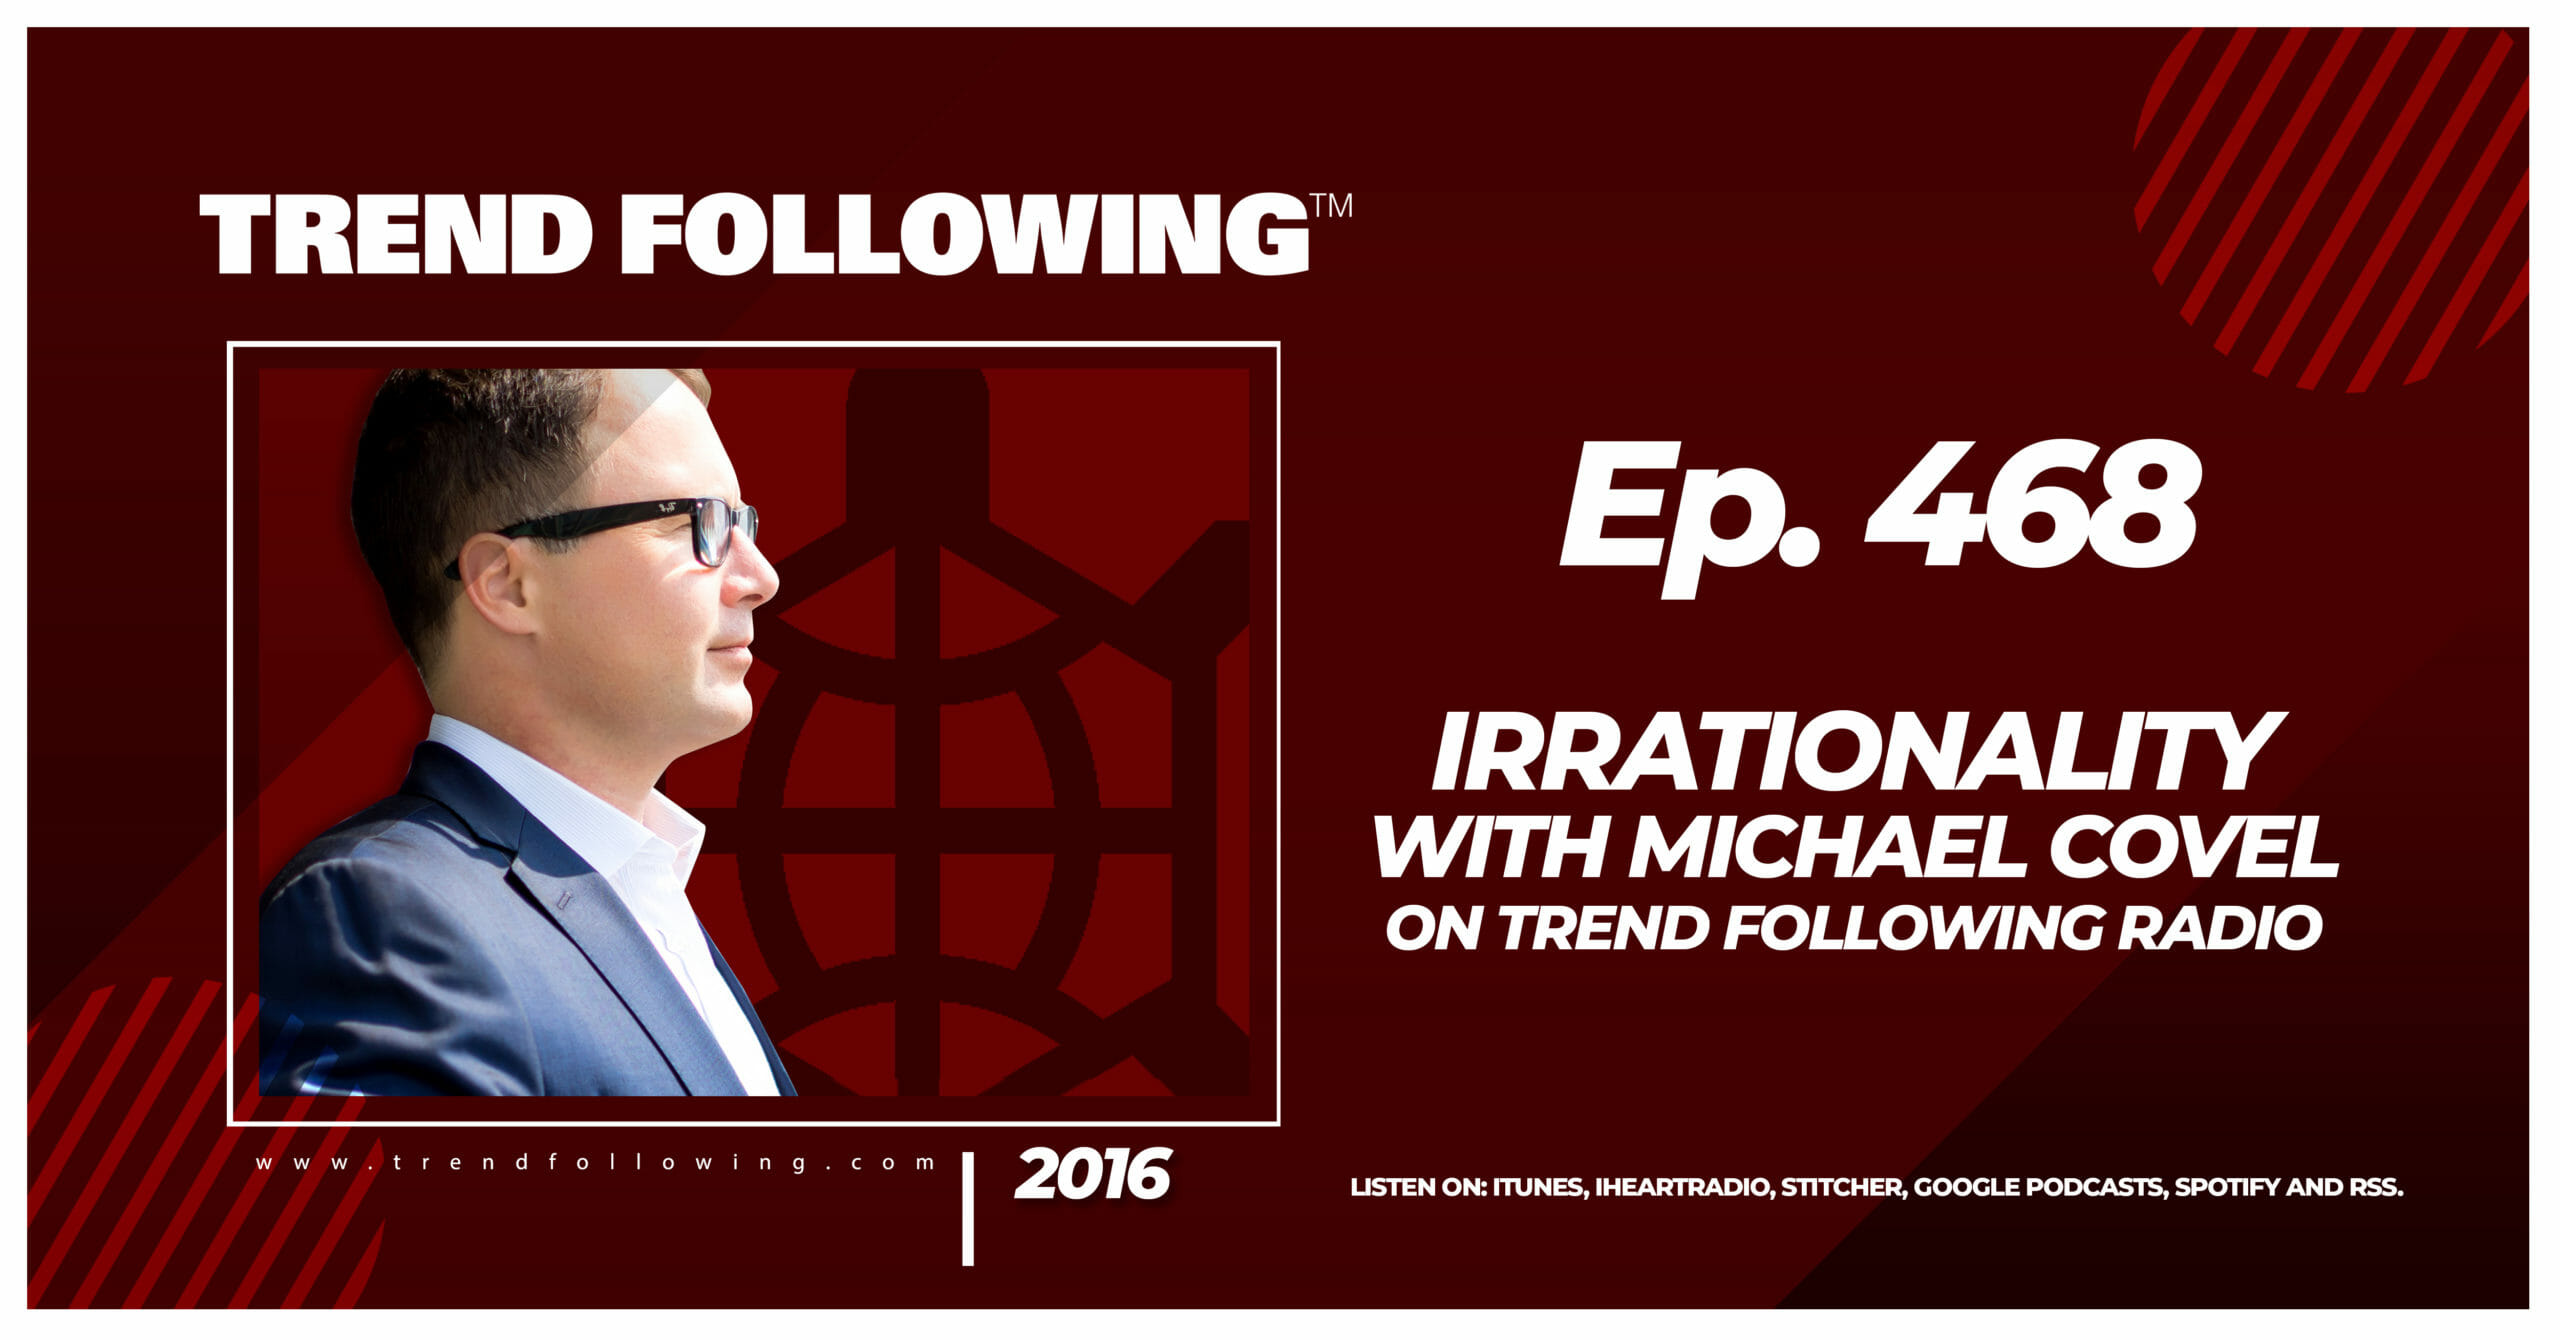 Irrationality with Michael Covel on Trend Following Radio